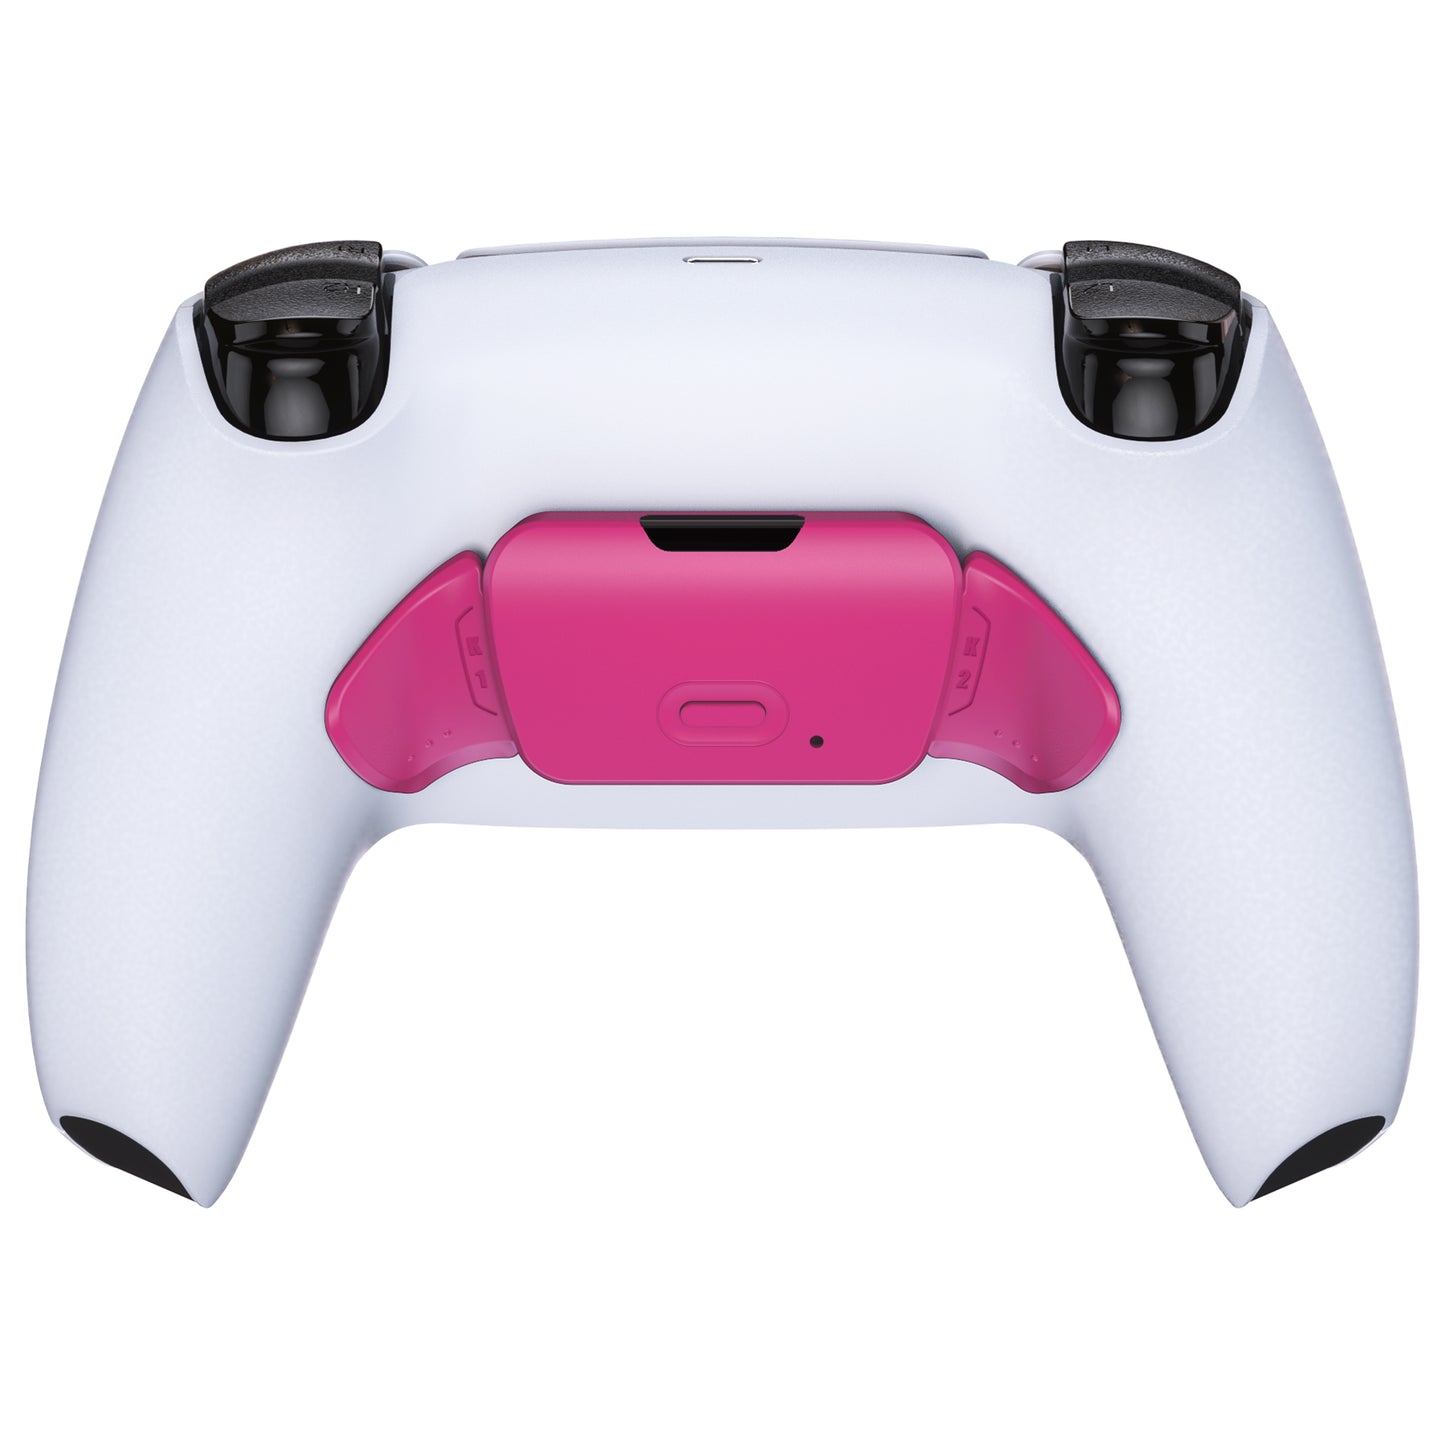 eXtremeRate Retail Nova Pink Replacement Redesigned K1 K2 Back Button Housing Shell for ps5 Controller eXtremerate RISE Remap Kit - Controller & RISE Remap Board NOT Included - WPFM5009